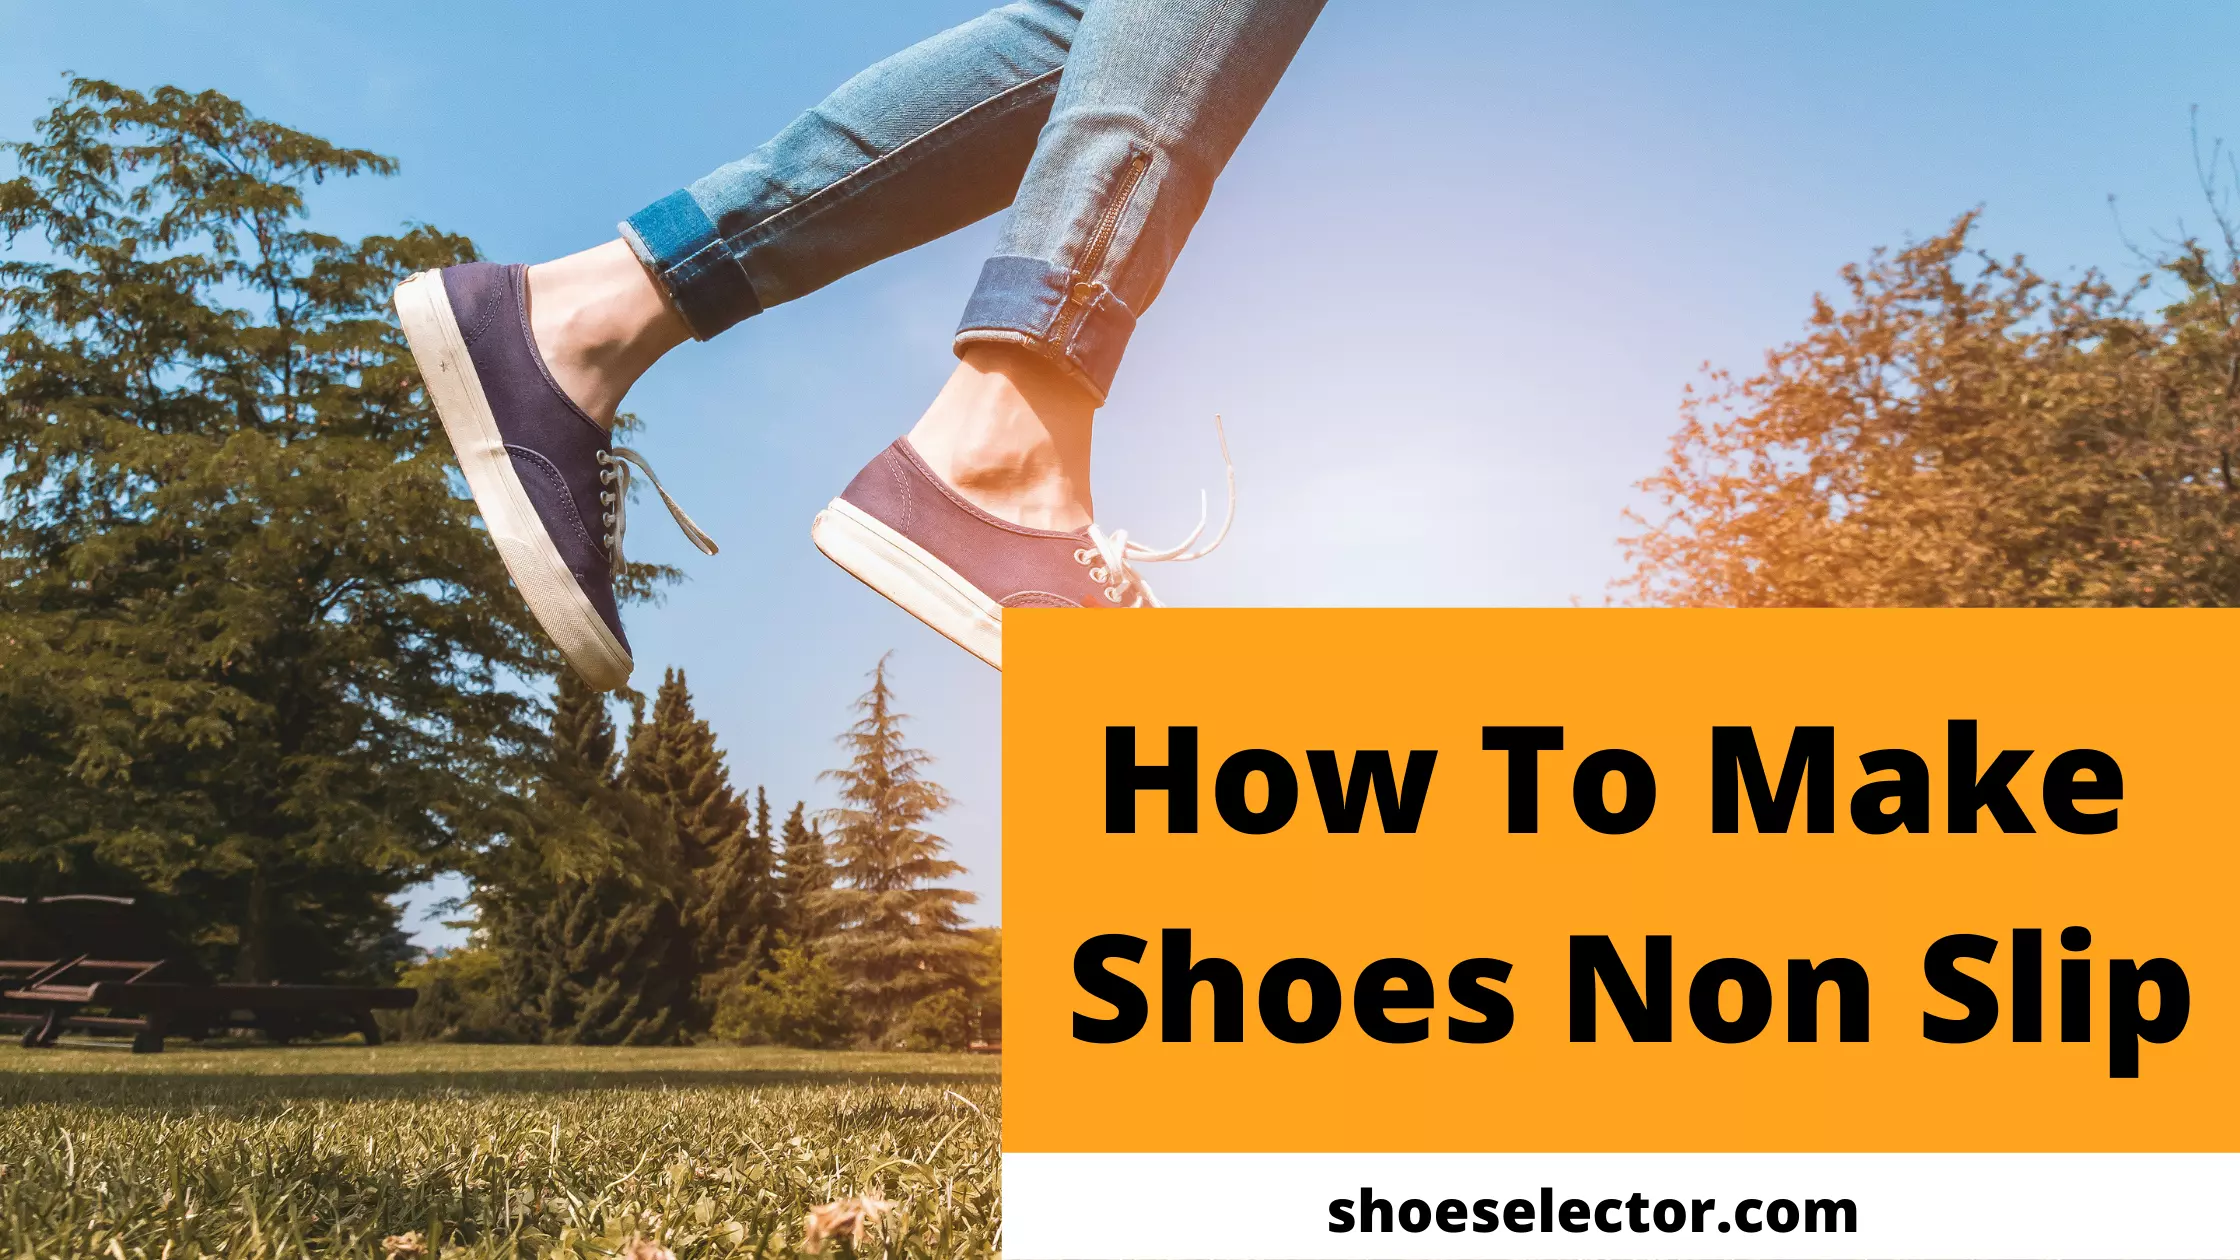 How to Make Shoes Non Slip | Tips and Tricks for Stopping Slips and Falls